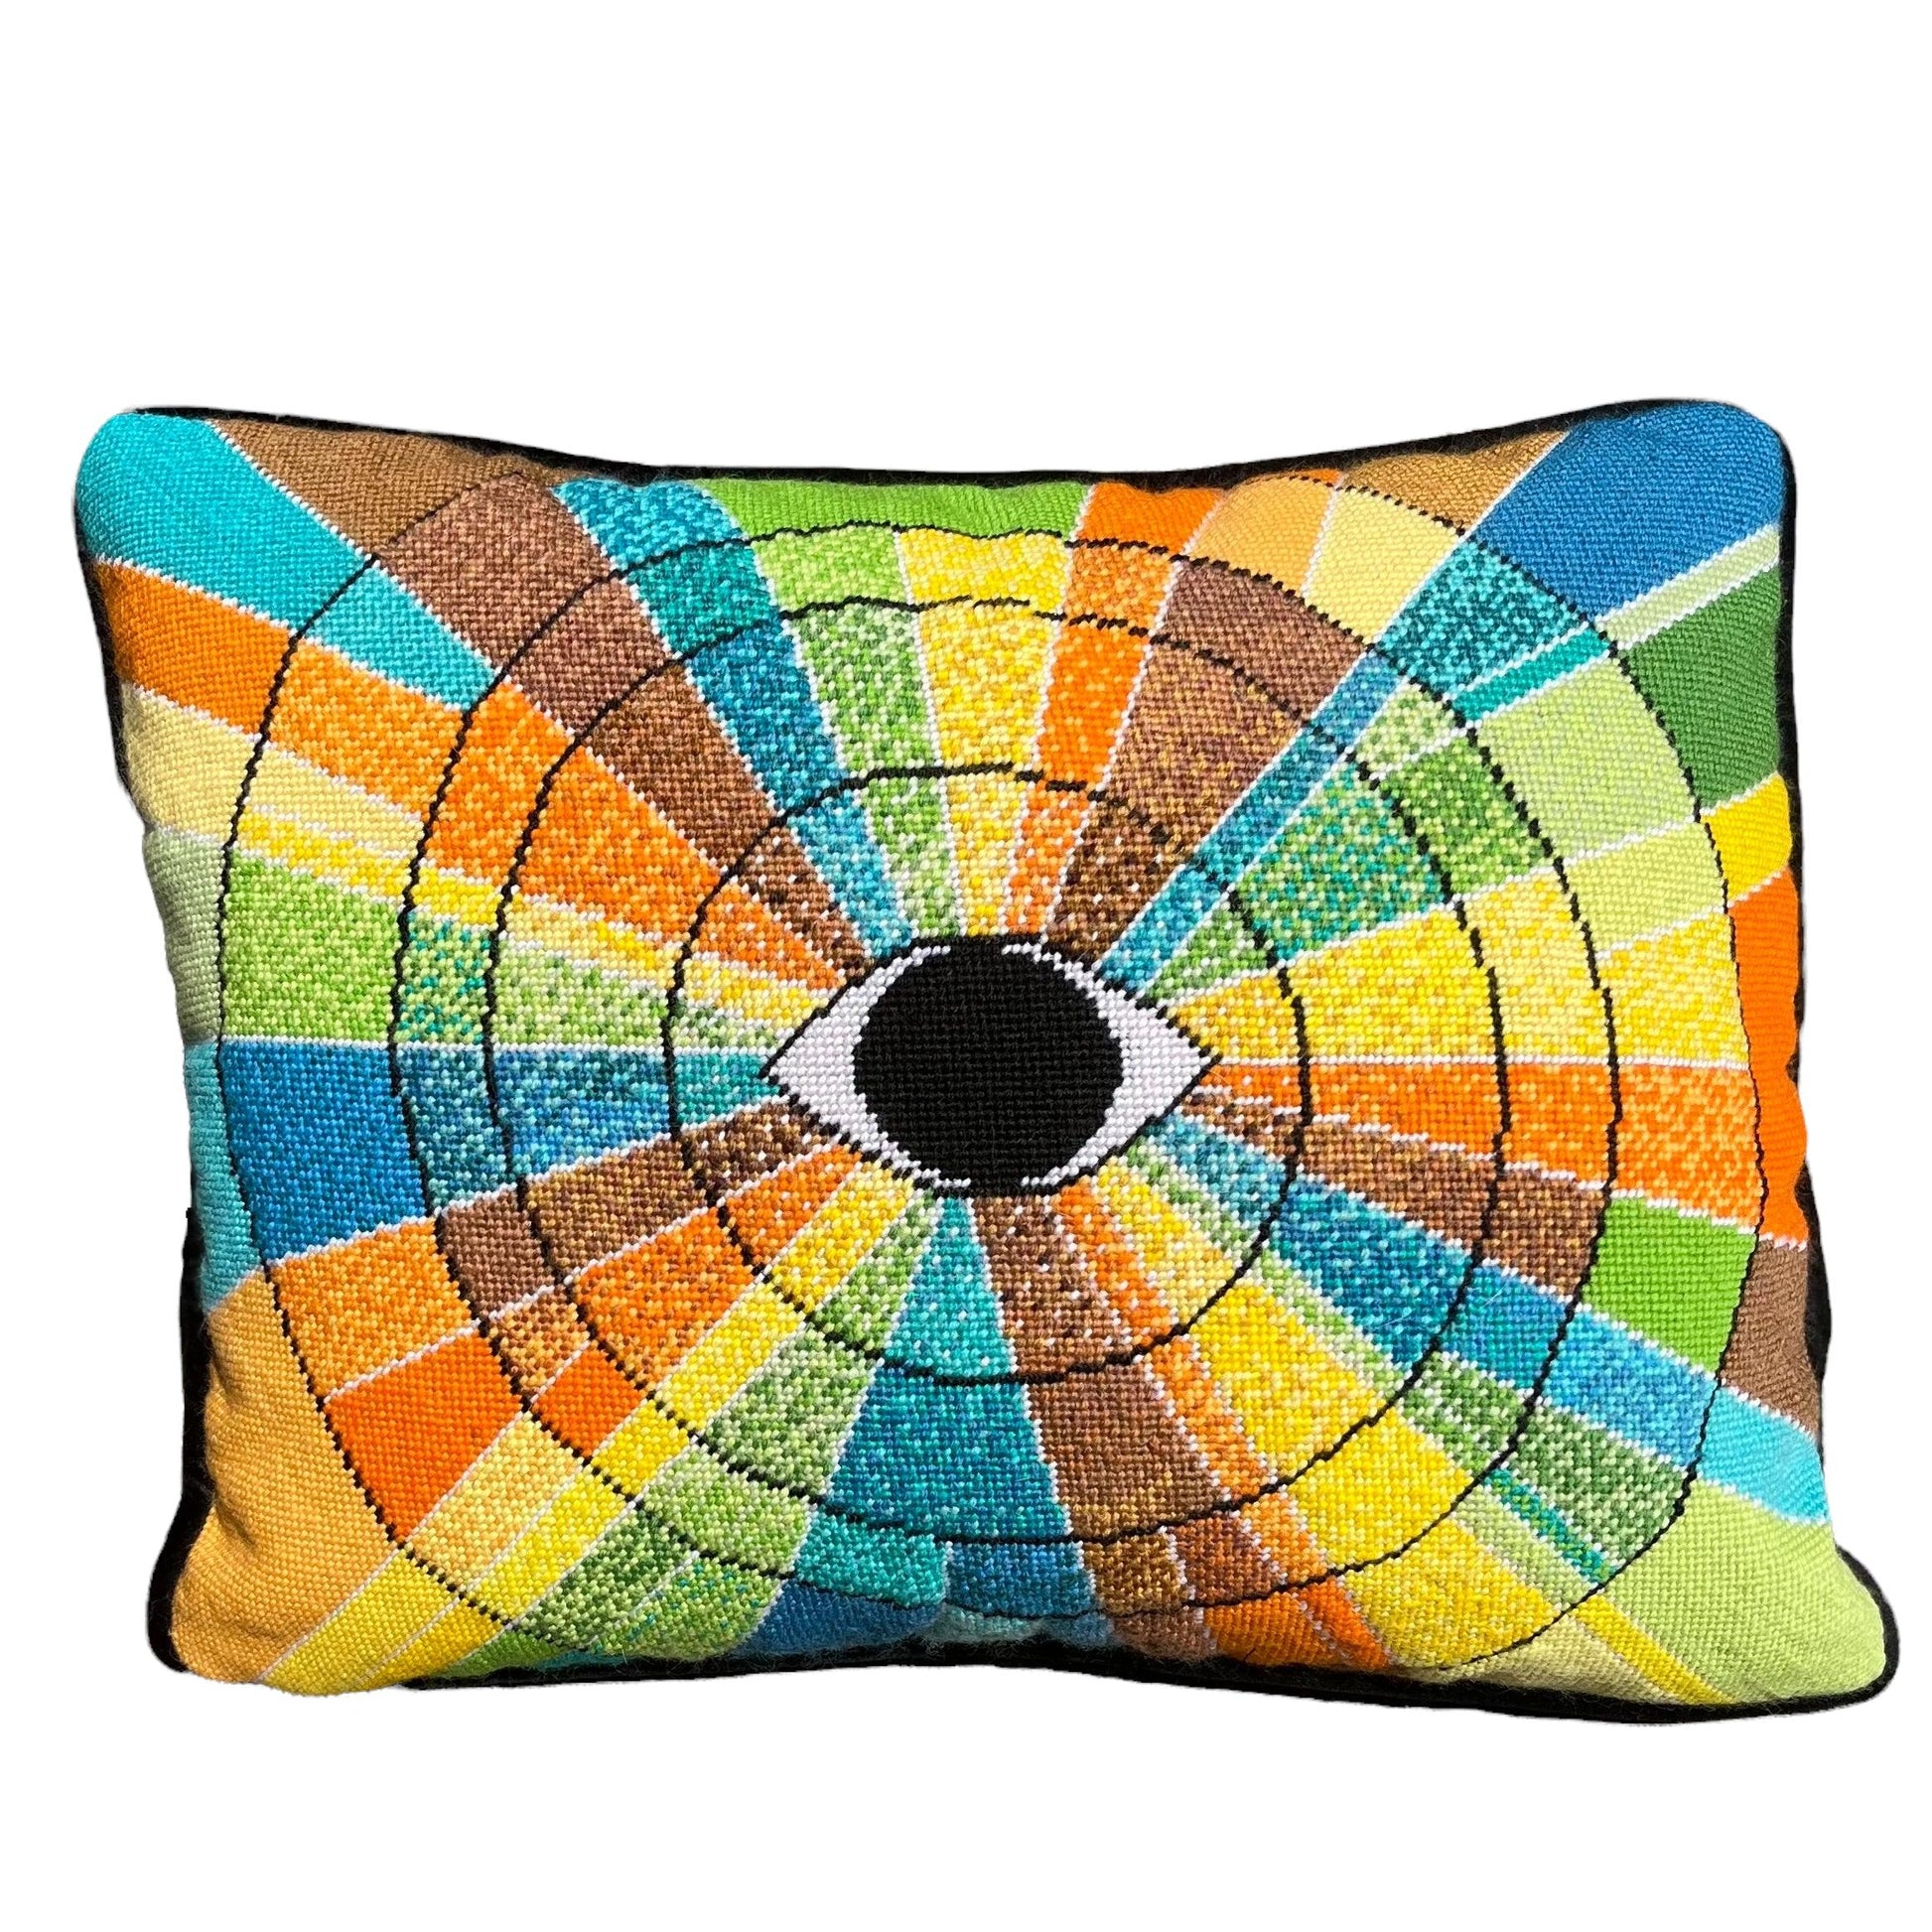 pillow has eye centered design with variegated rays of color - turquoise, green, brown, orange, yellow